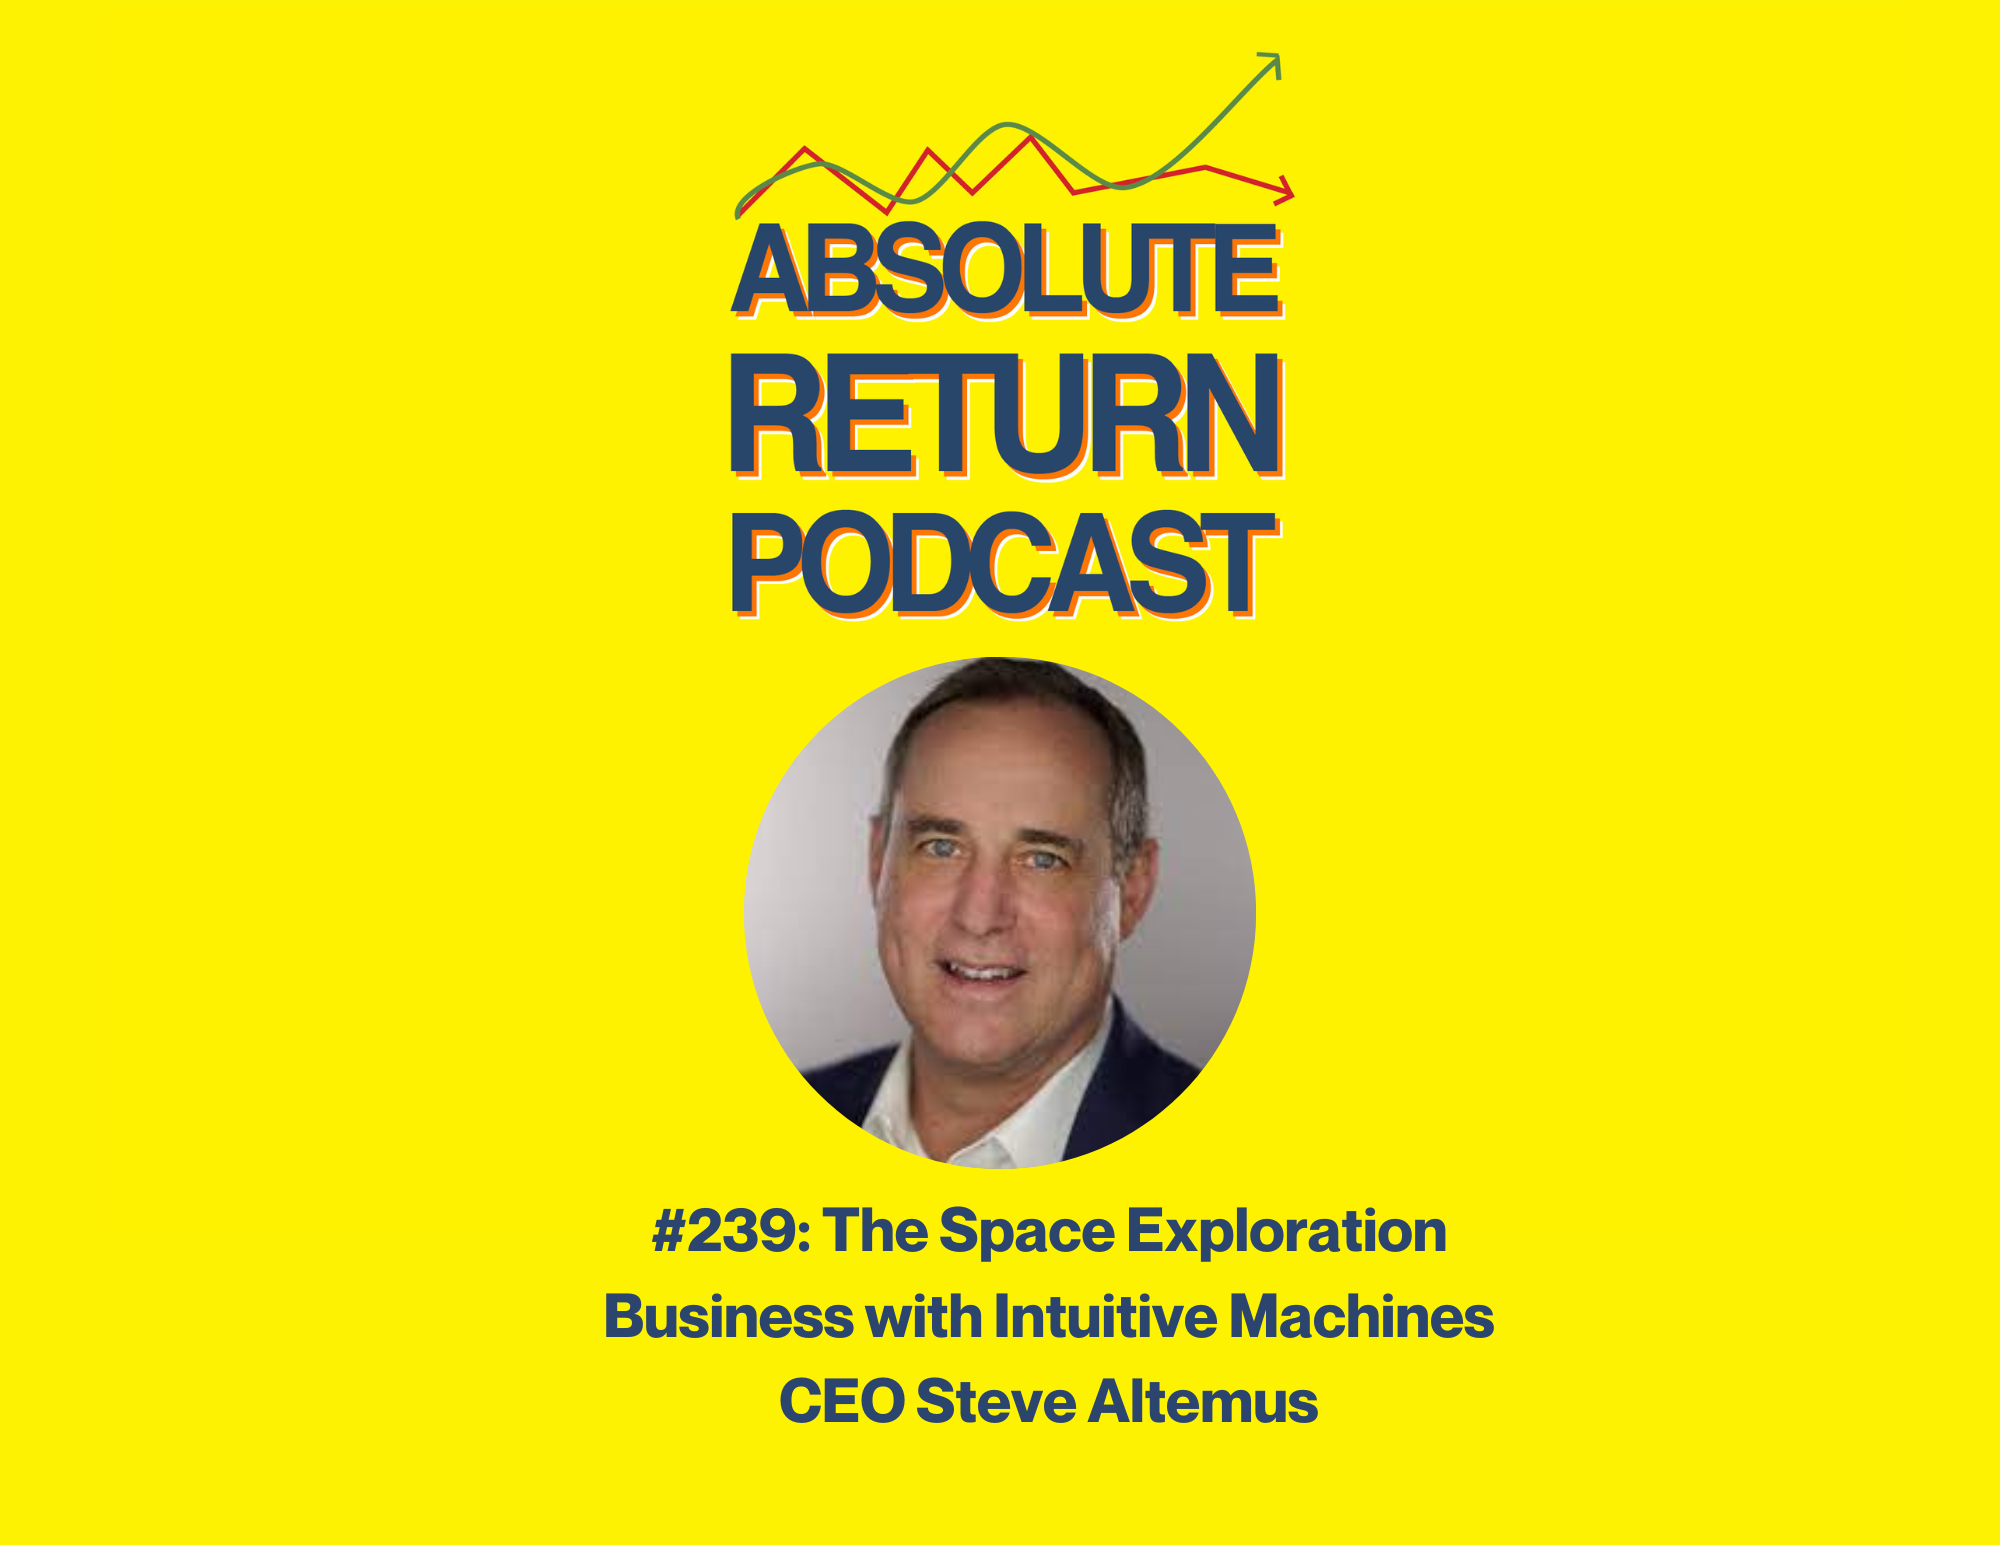 Absolute Return Podcast #239: The Space Exploration Business with Intuitive Machines CEO Steve Altemus